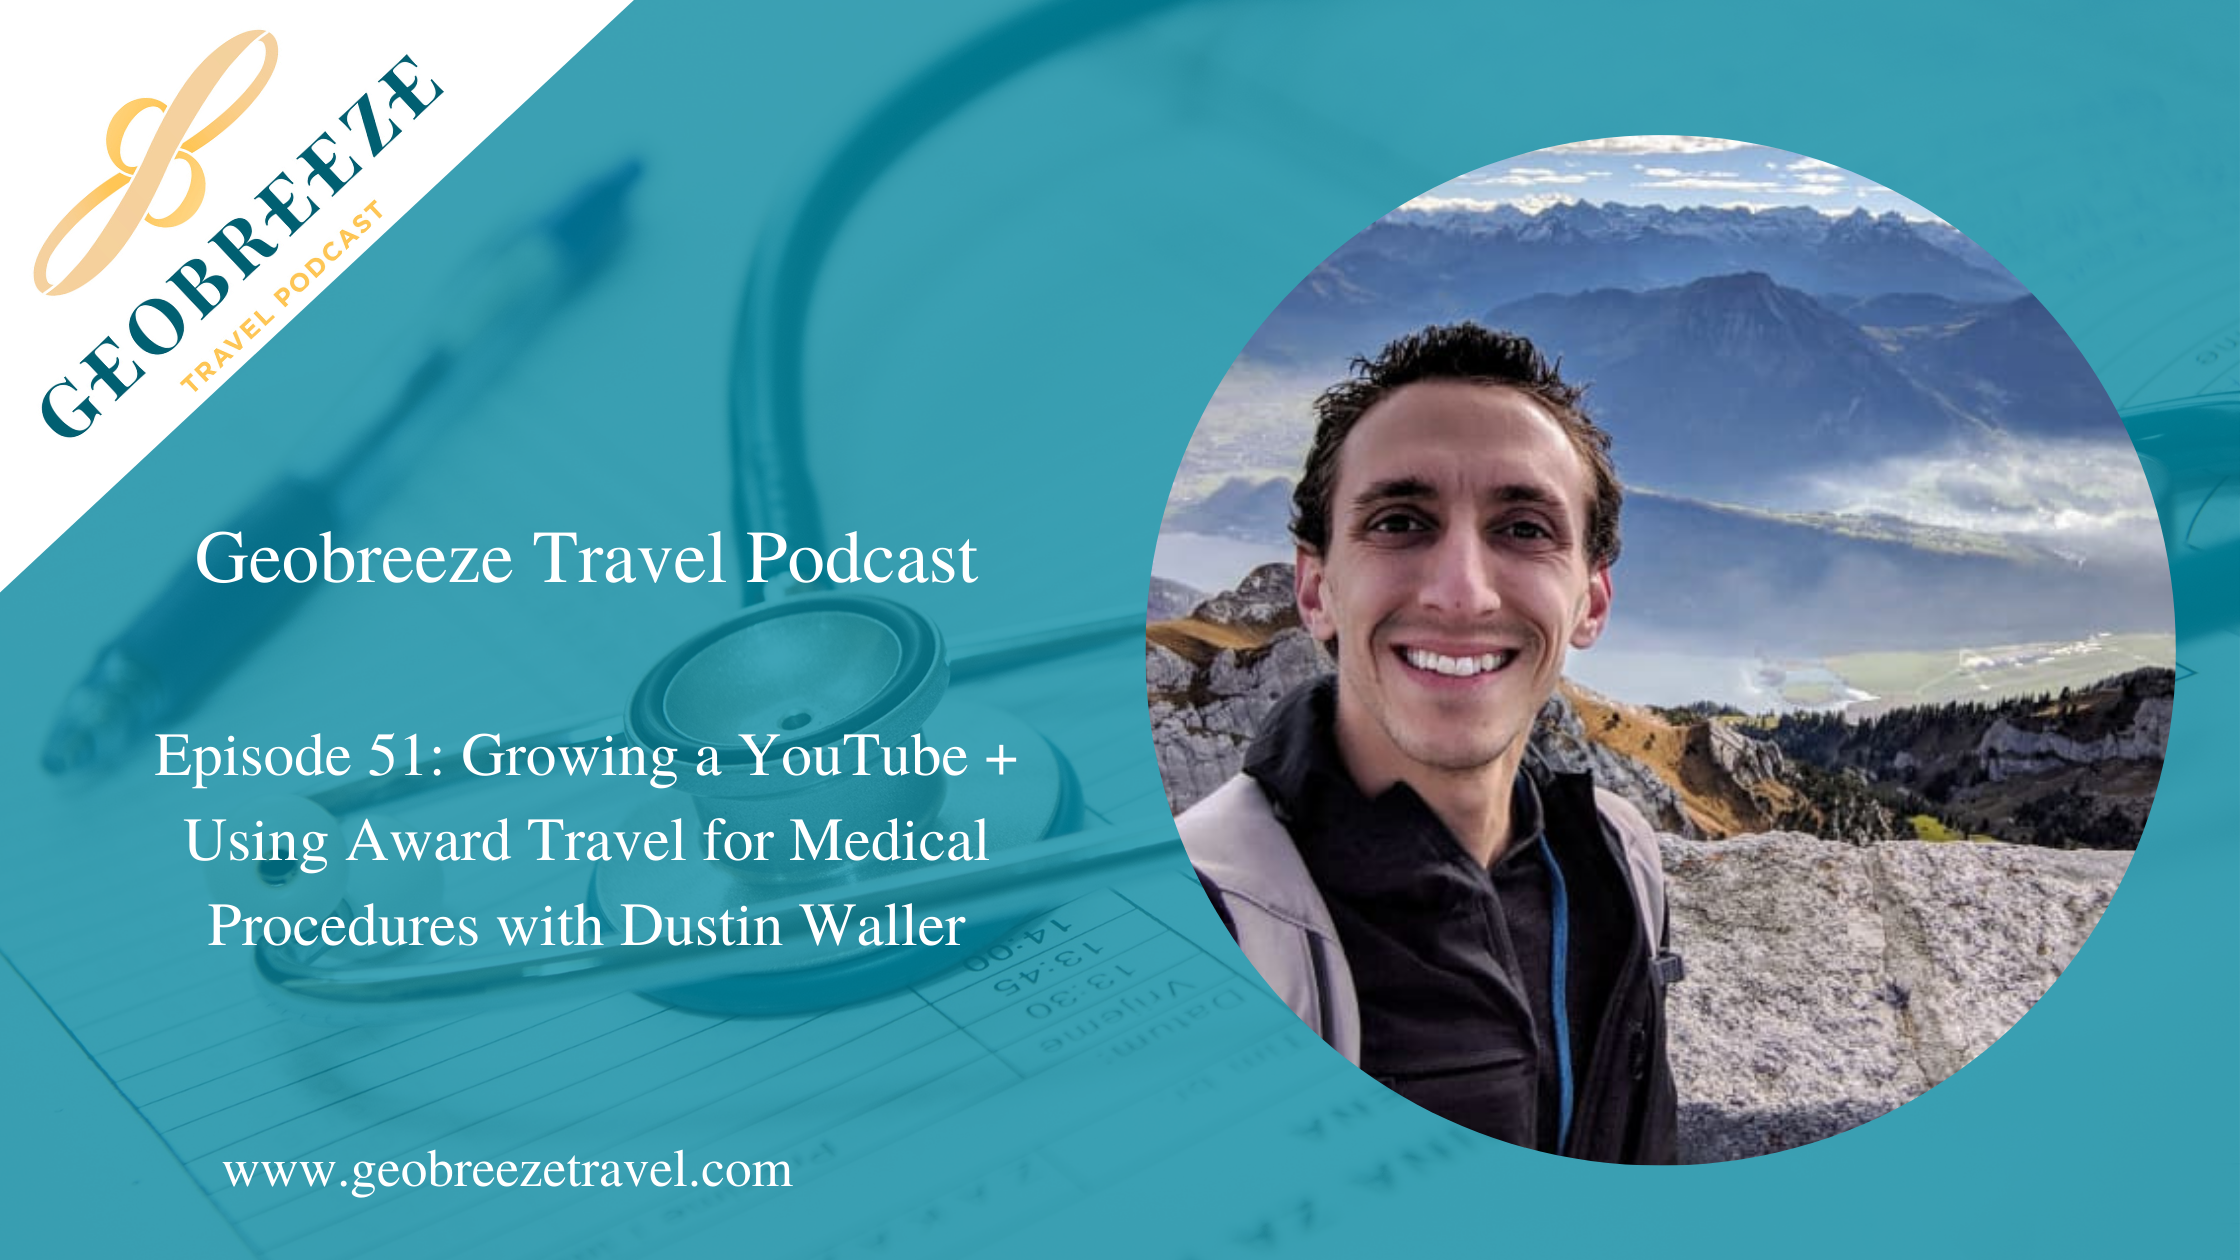 Episode 51: Growing a YouTube + Using Award Travel for Medical Procedures with Dustin Waller